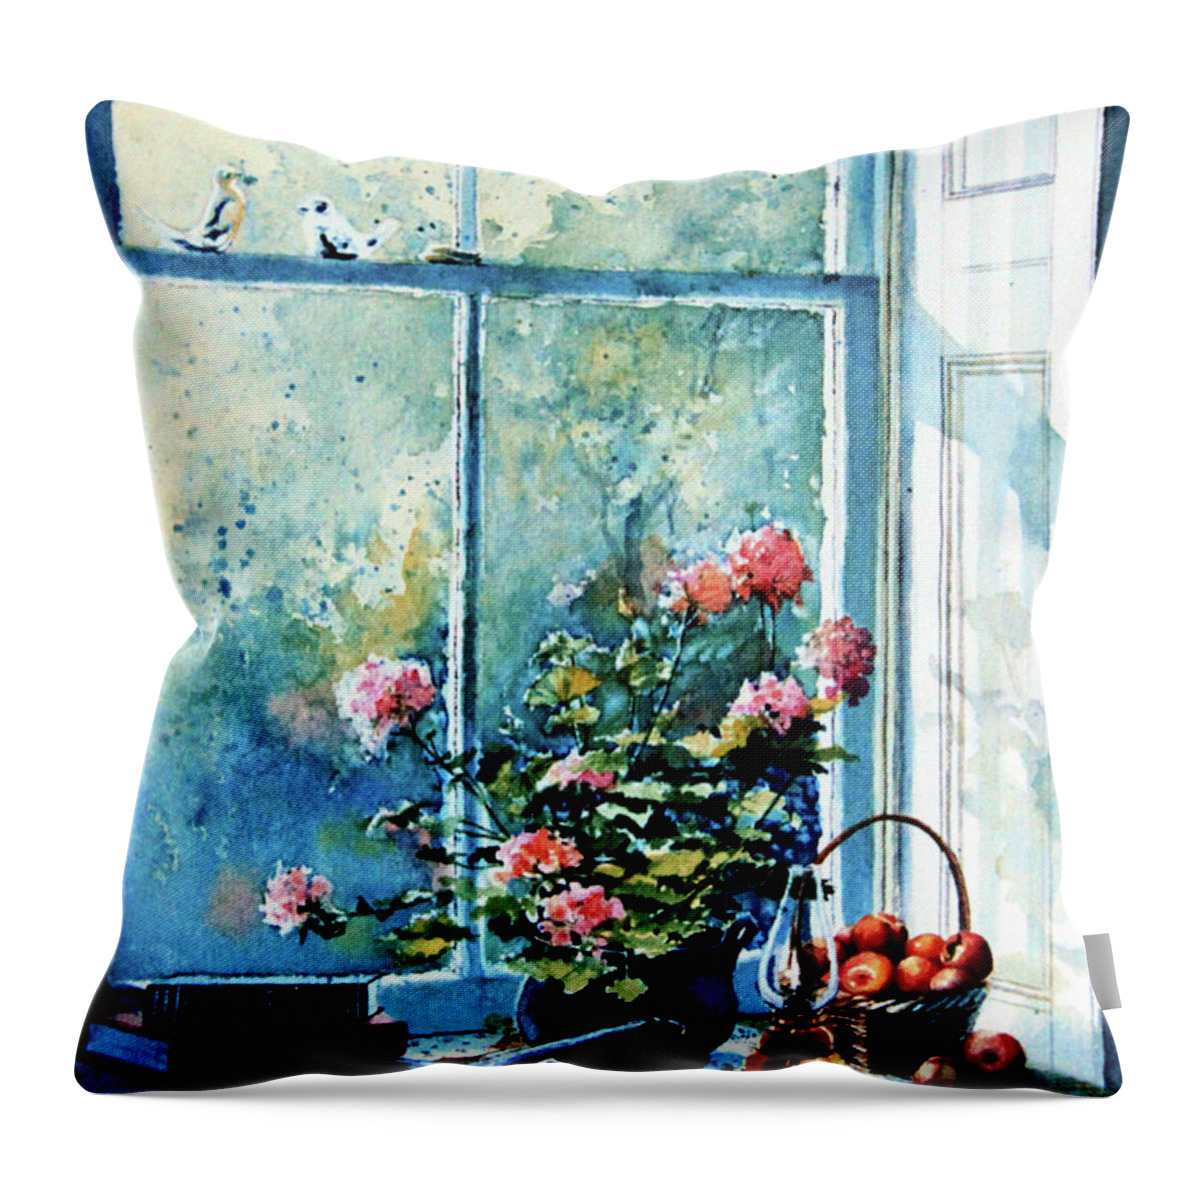 Still Life Throw Pillow featuring the painting Simple Pleasures by Hanne Lore Koehler